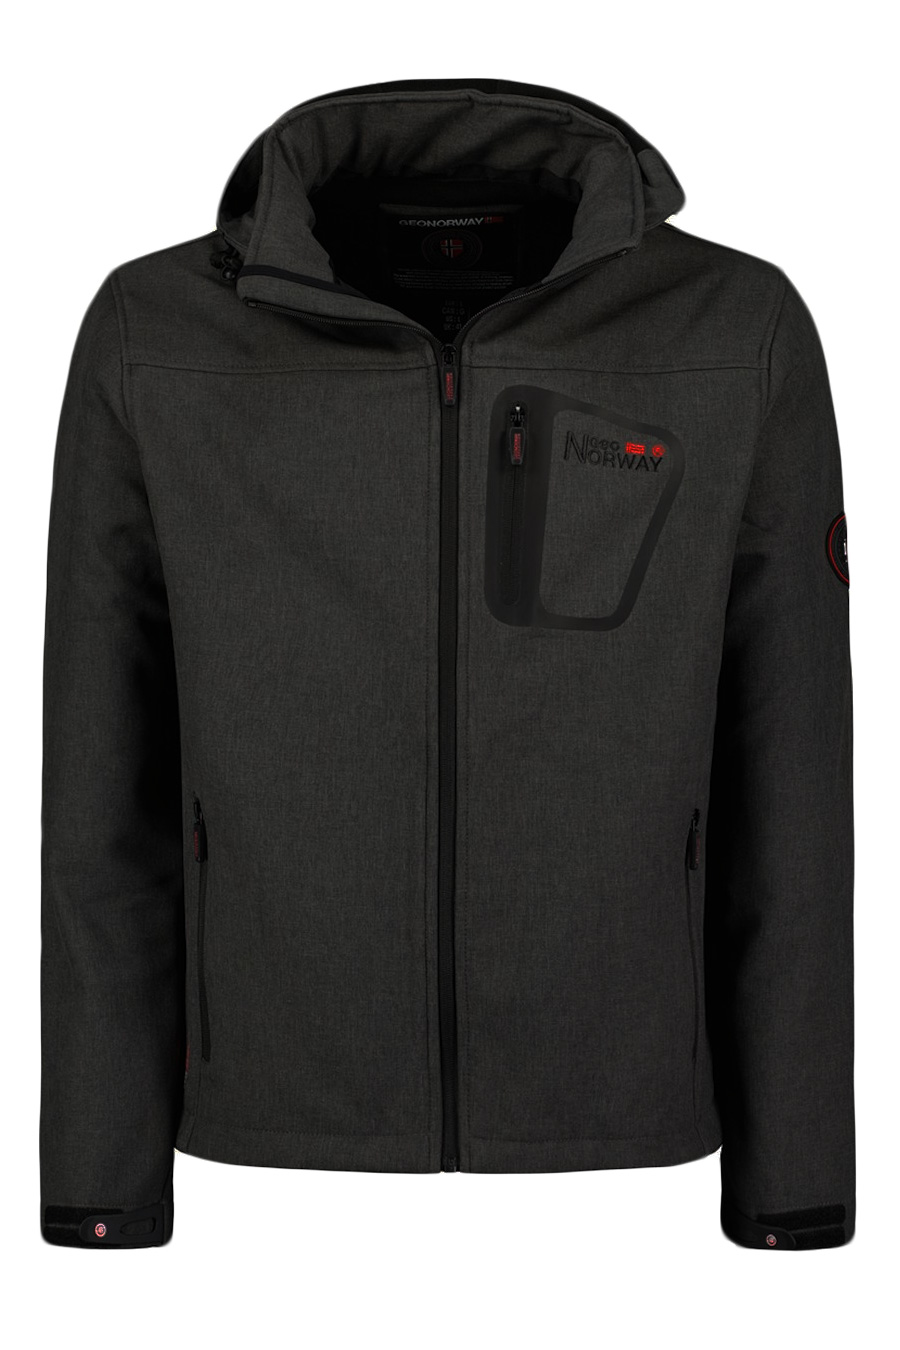 Striukė GEOGRAPHICAL NORWAY TEXSHELL-Dark-Grey